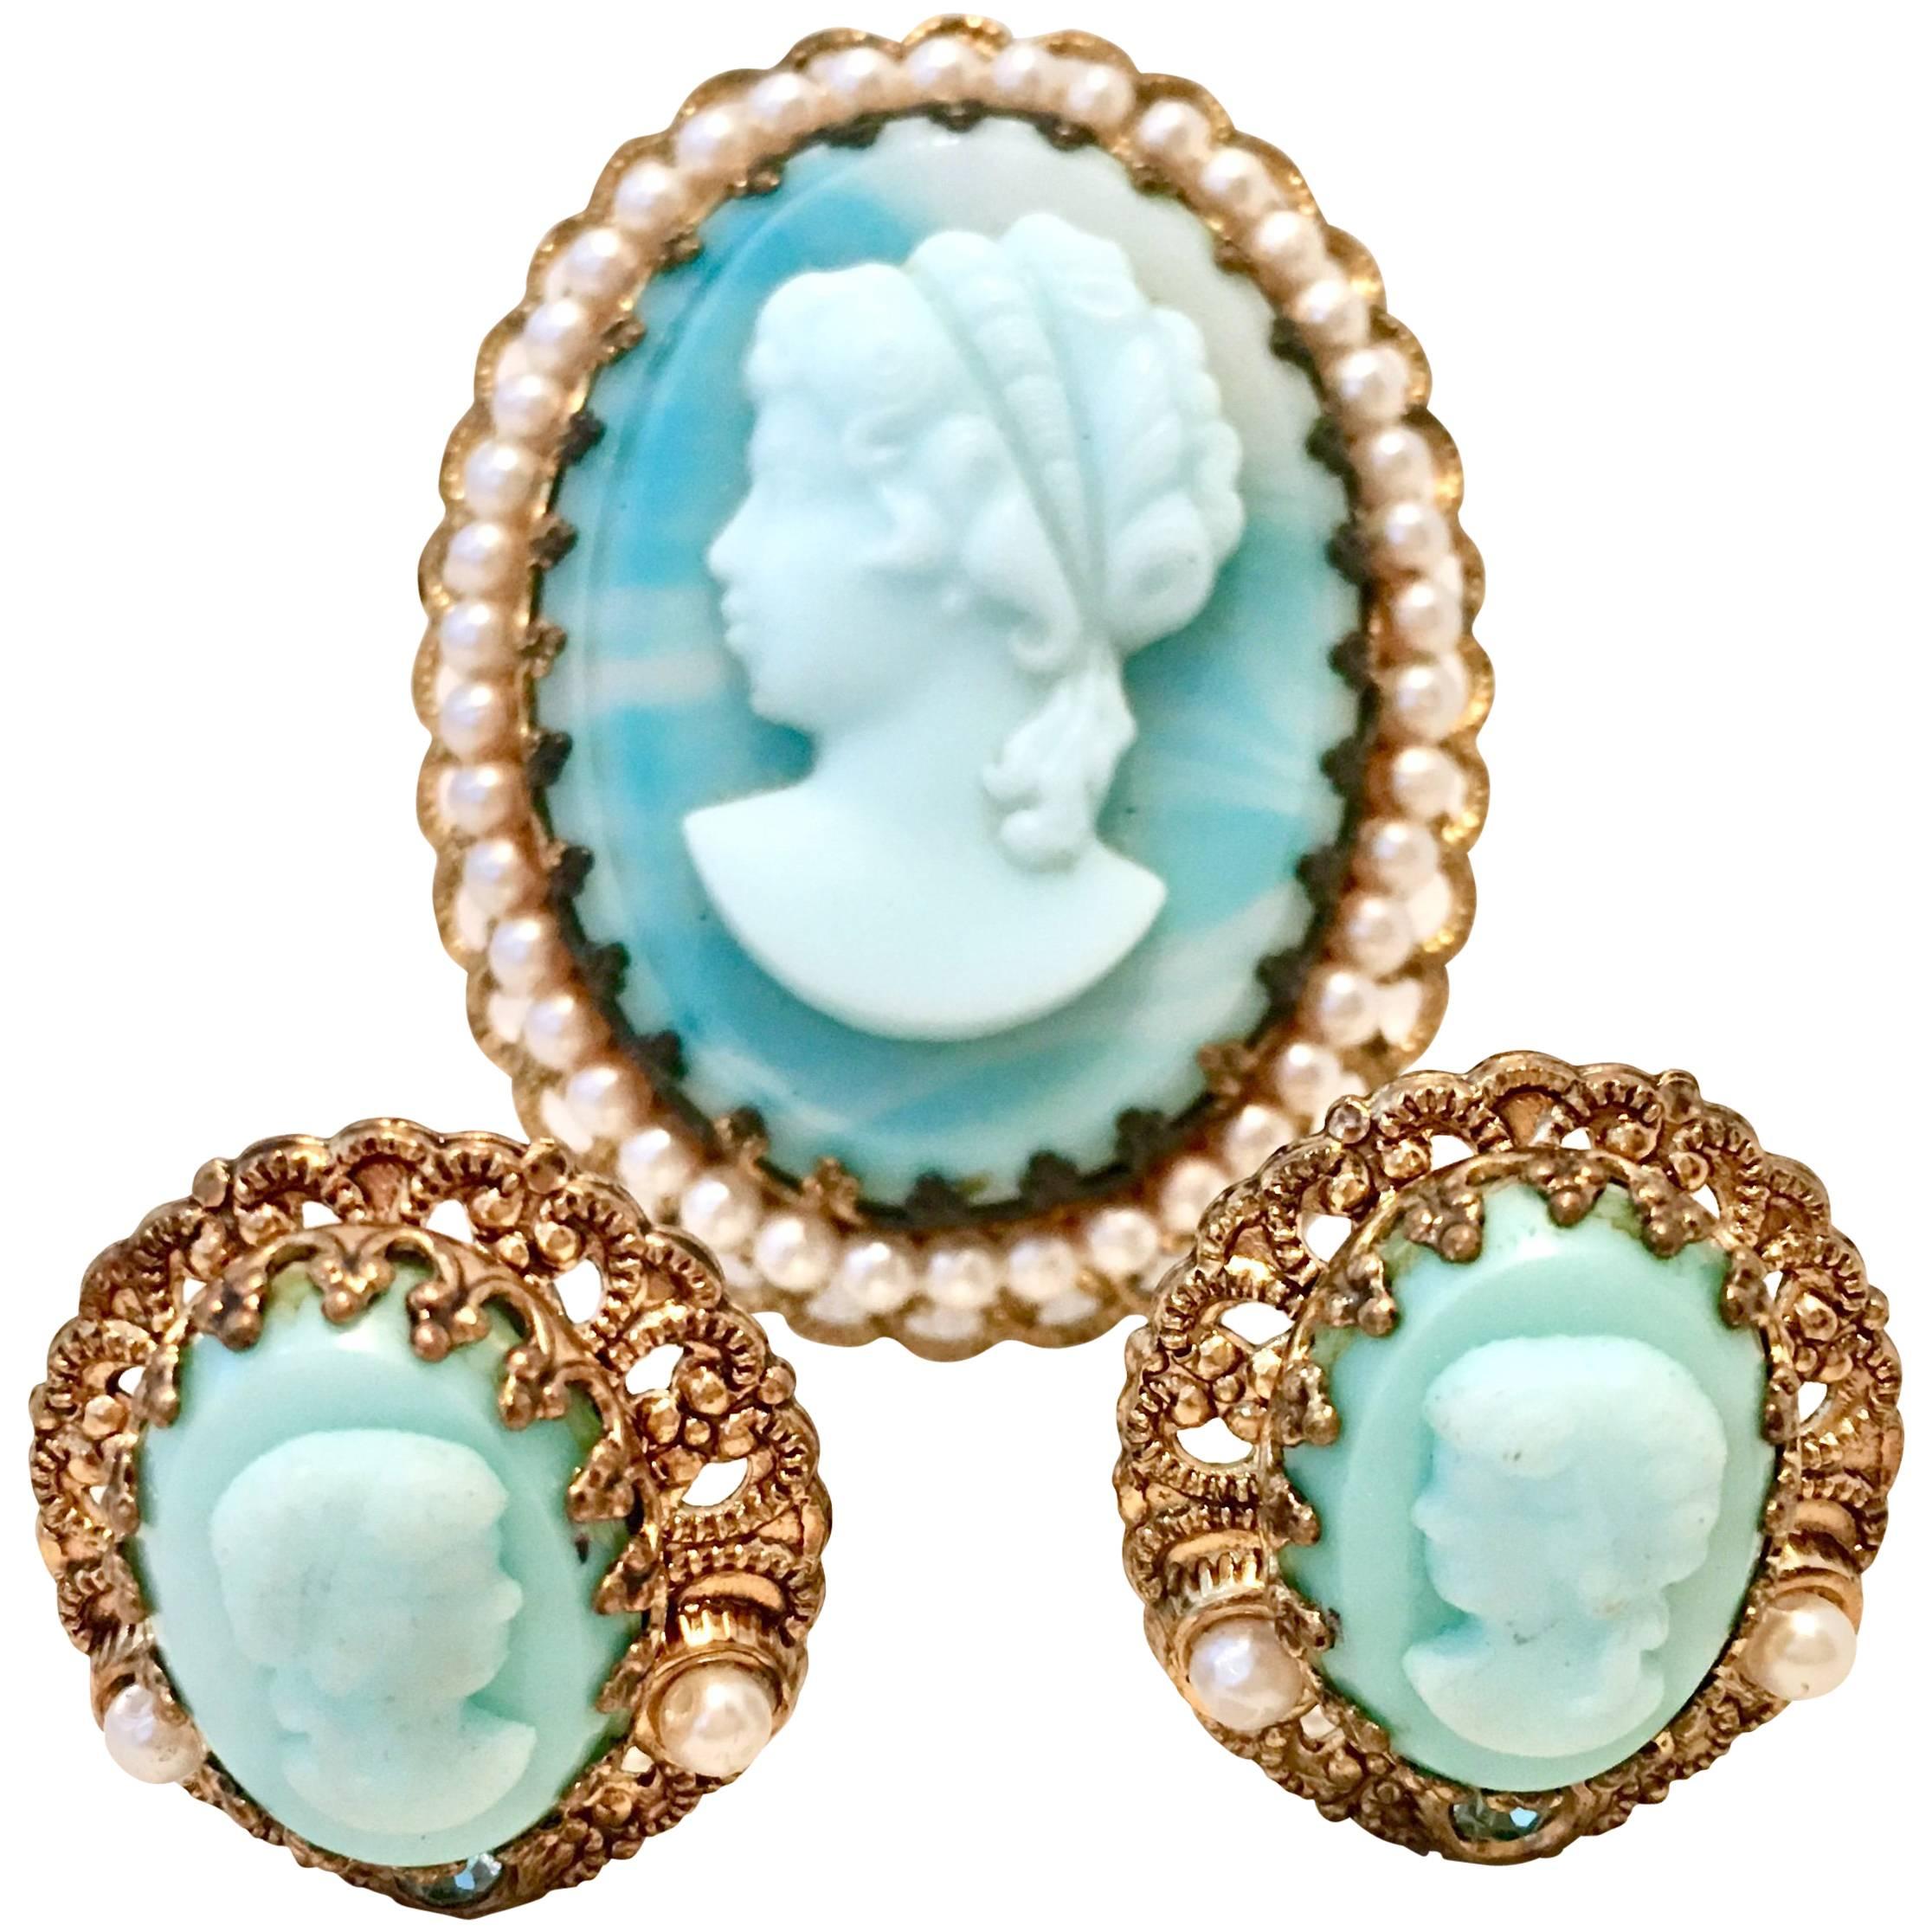 1950'S Germany Gold Filigree Carved Blue Cameo Brooch & Earrings S/3